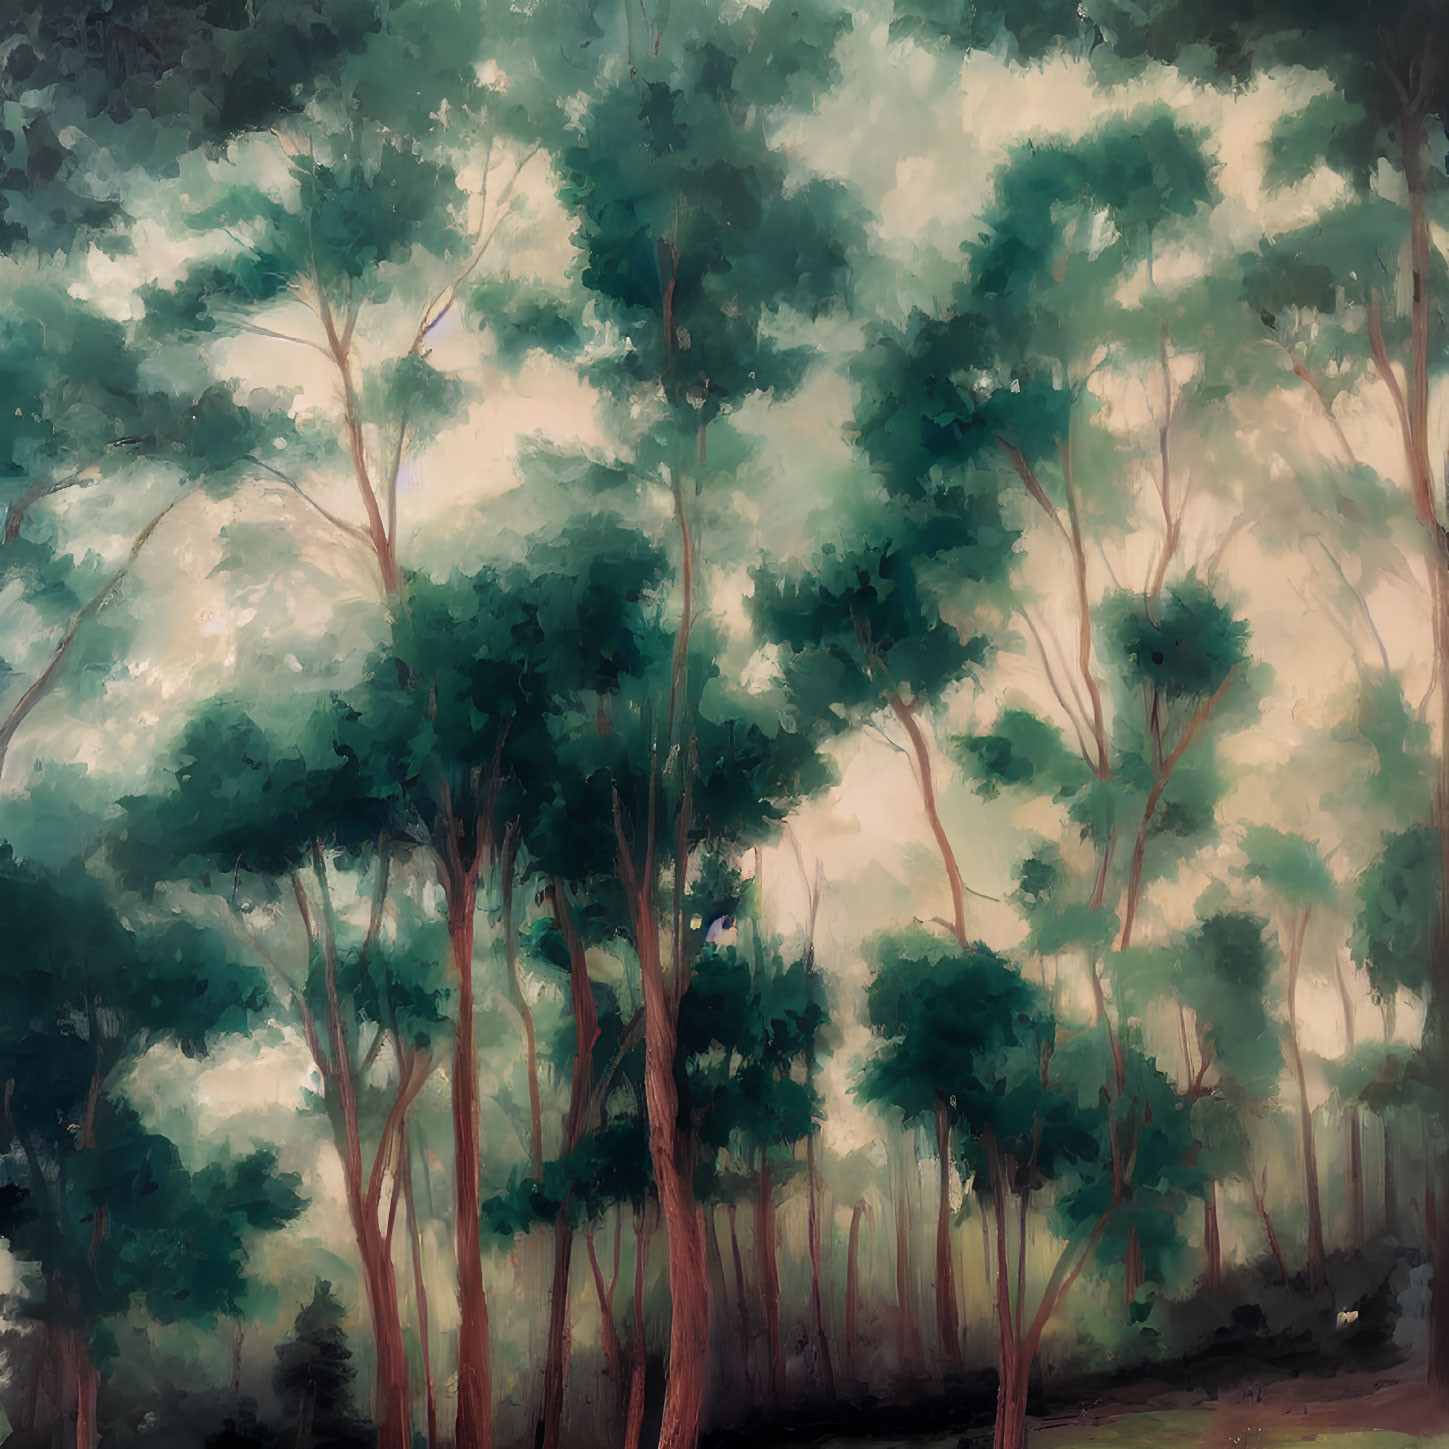 Impressionistic painting of dense forest with tall green trees